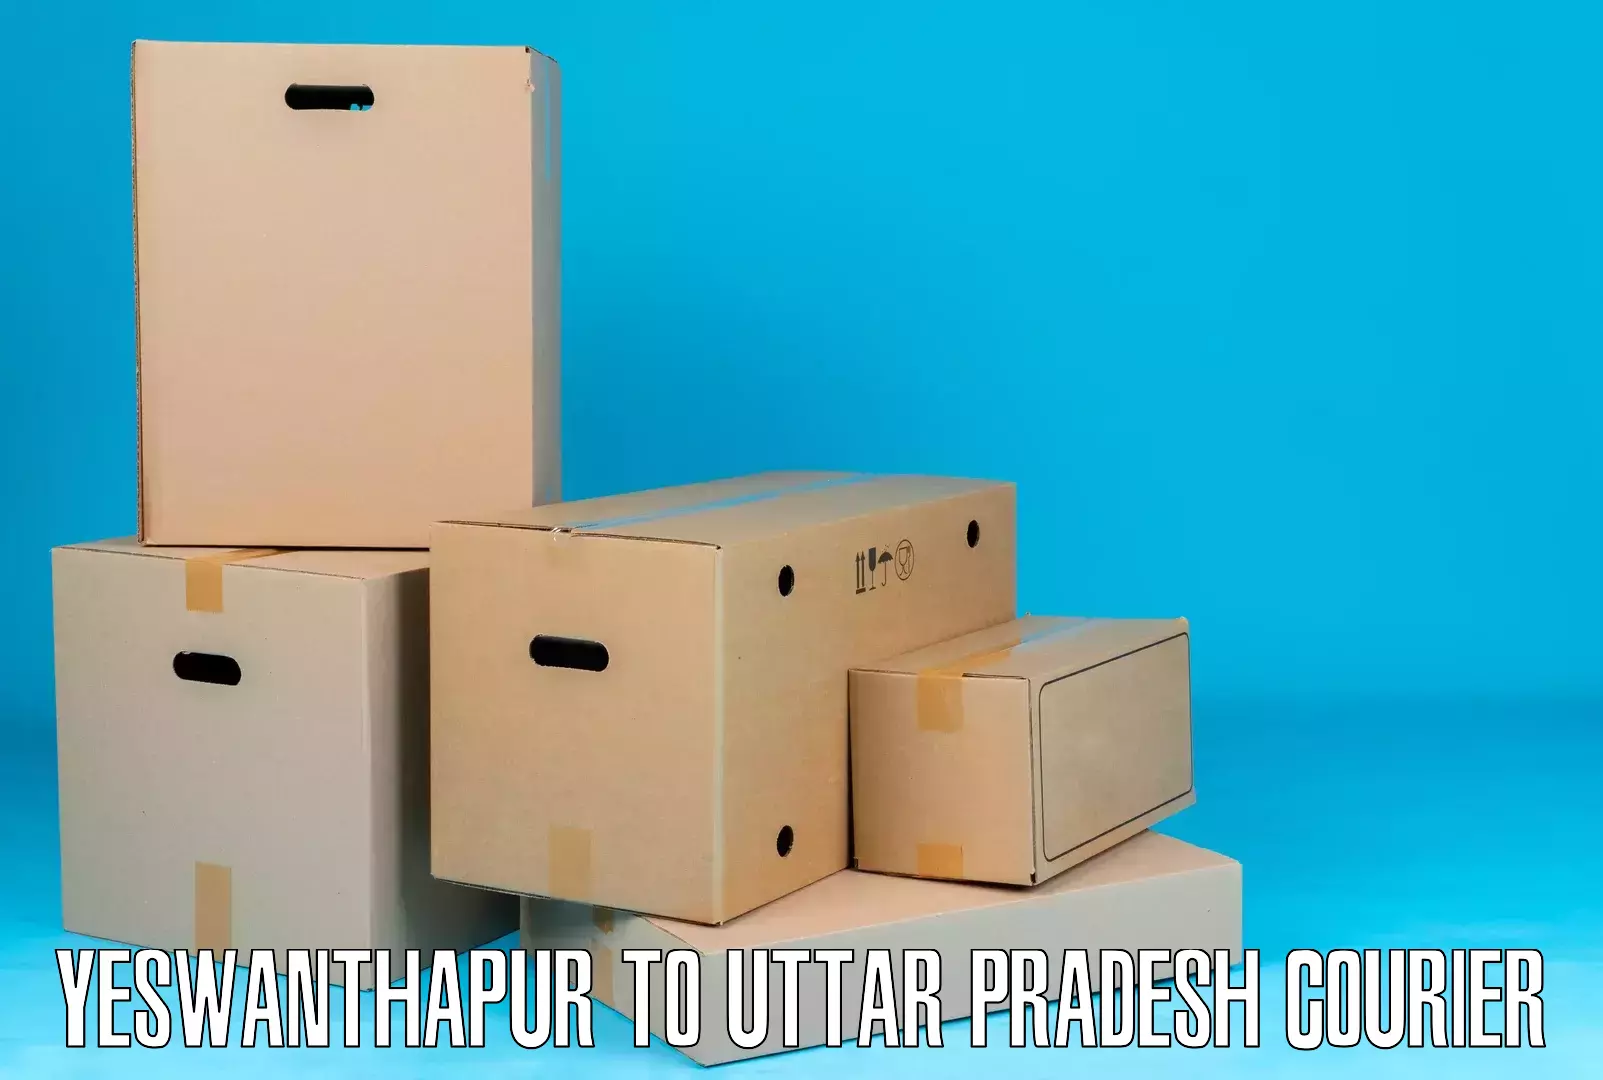 Package consolidation Yeswanthapur to Sambhal